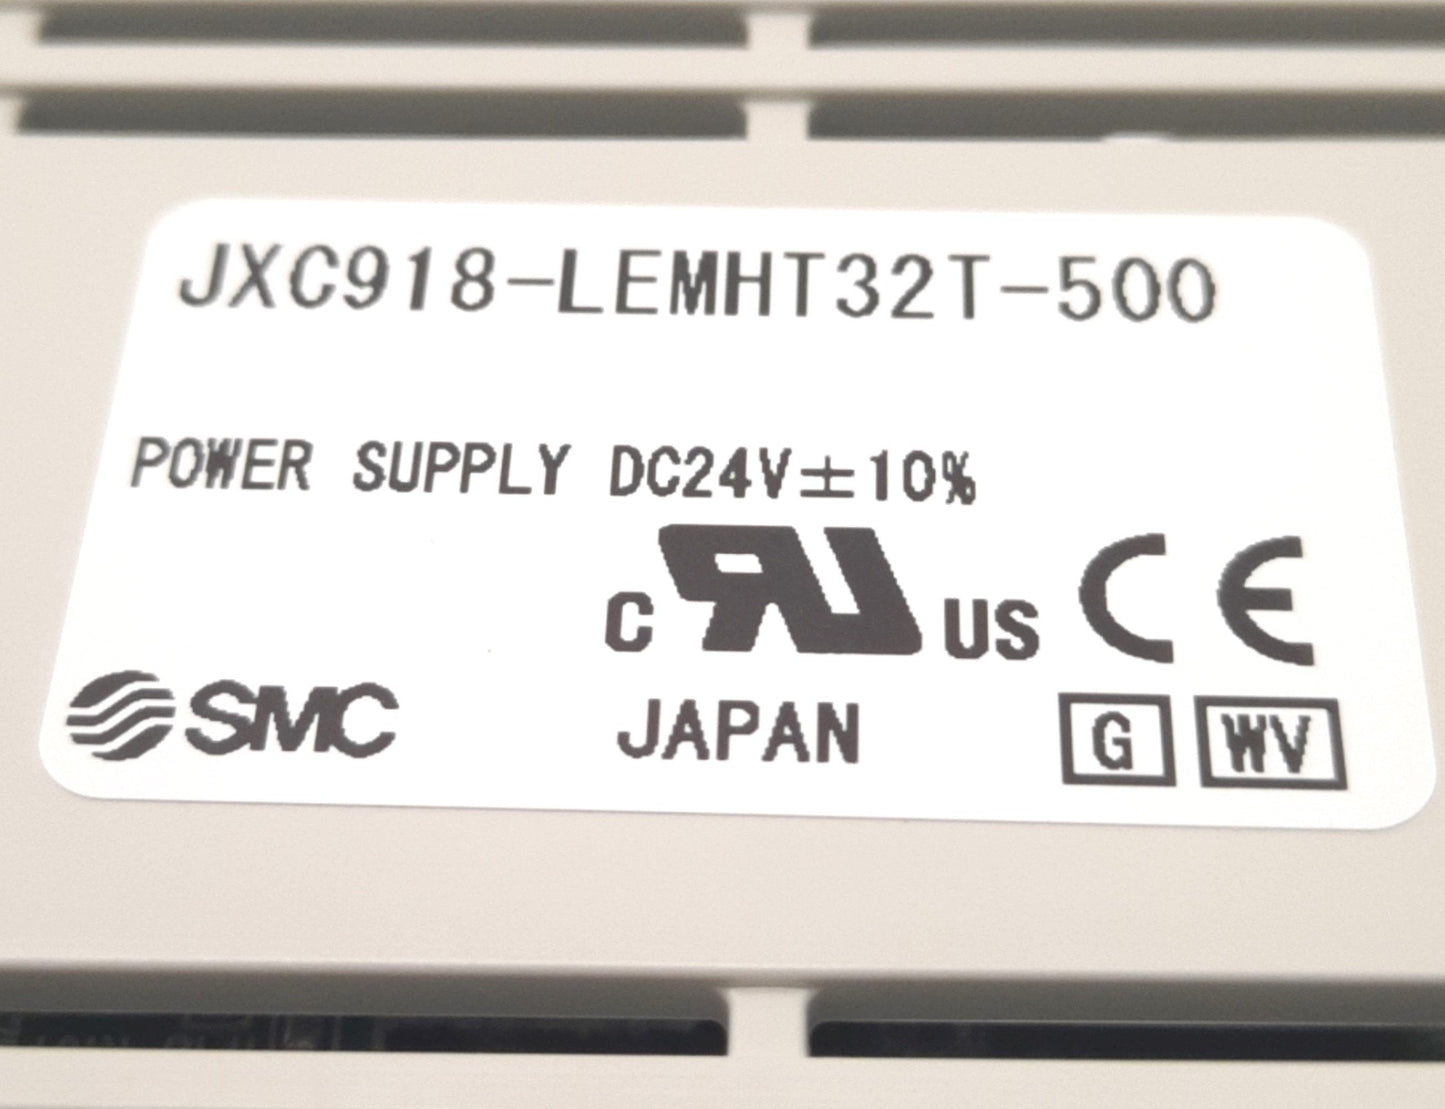 New Other SMC JXC918-LEMHT32T-500 Ethernet/IP Step Motor Driver Actuator Controller 24VDC